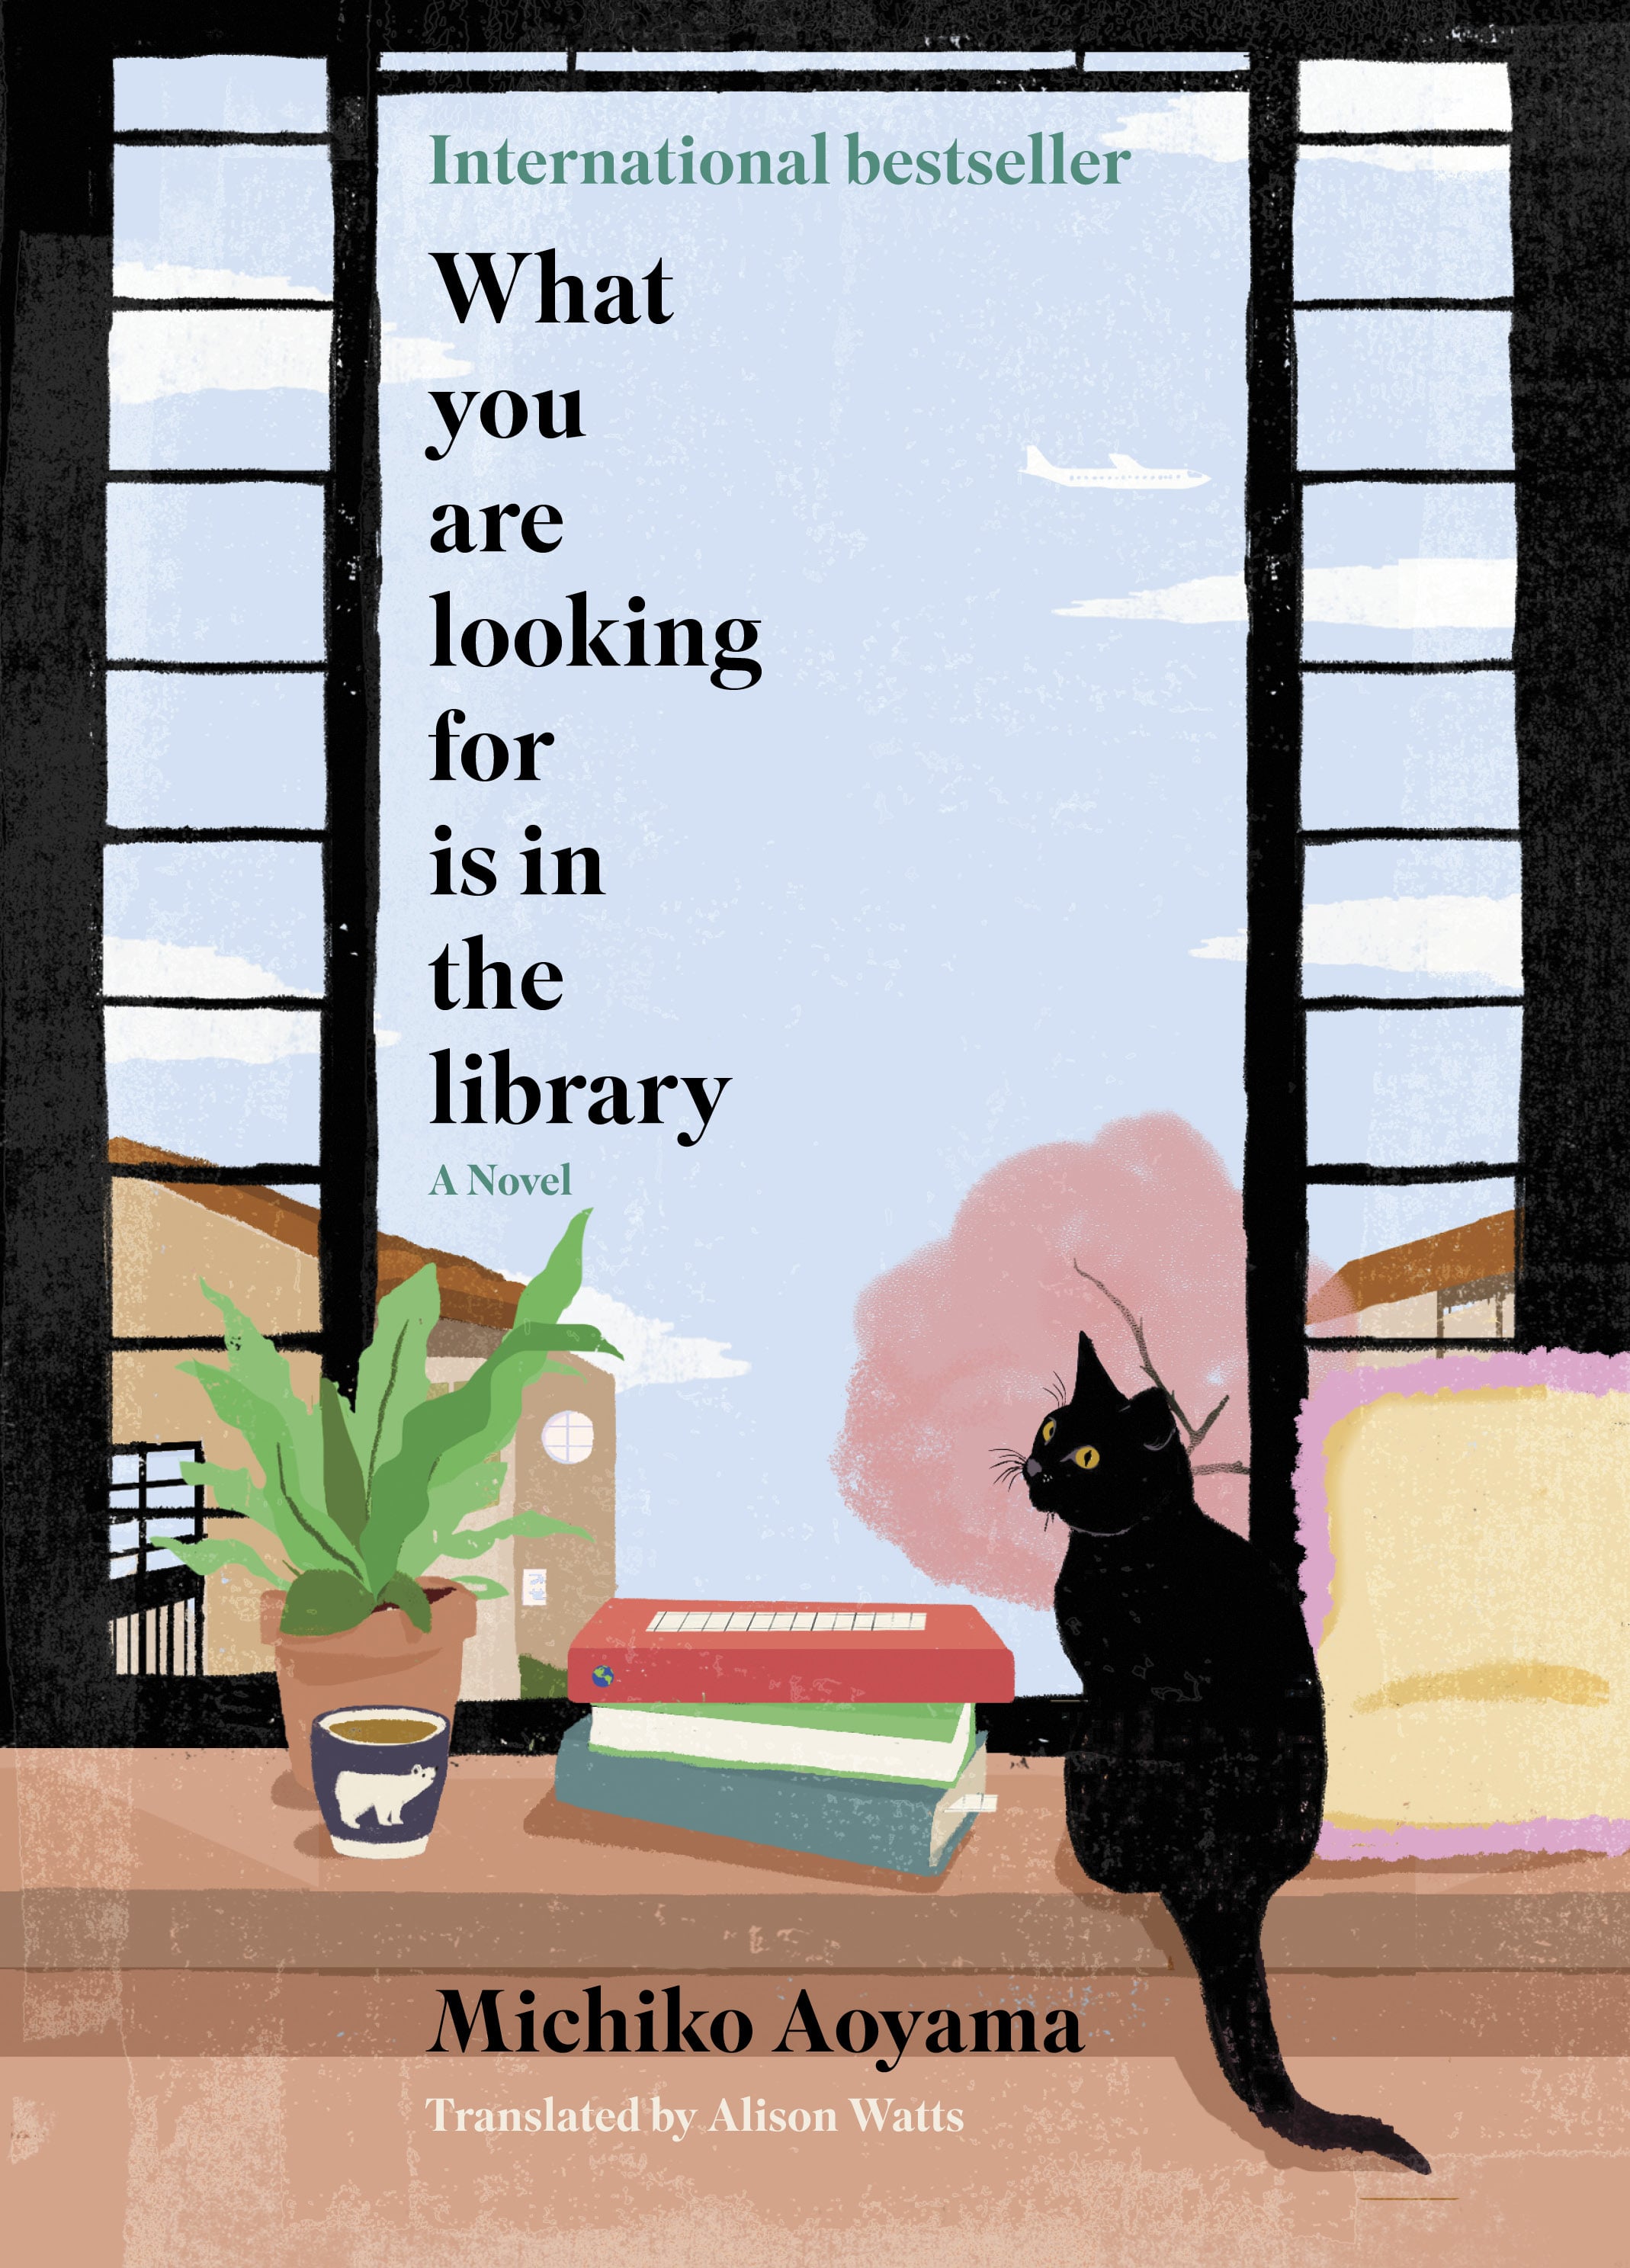 (PDF) What You Are Looking For Is in the Library By _ (Michiko Aoyama).pdf